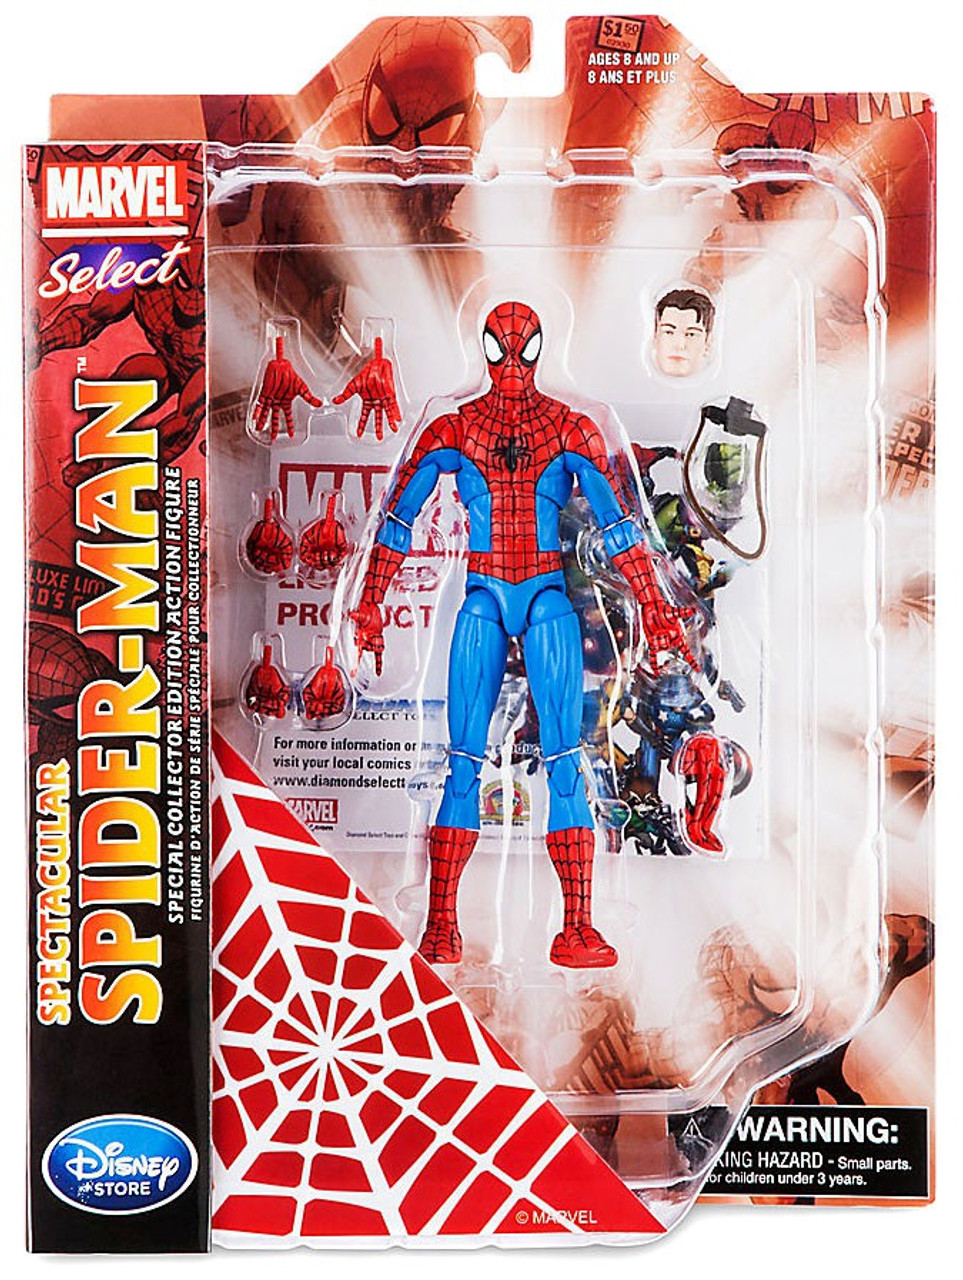 Marvel Marvel Select Spectacular SpiderMan Exclusive 7